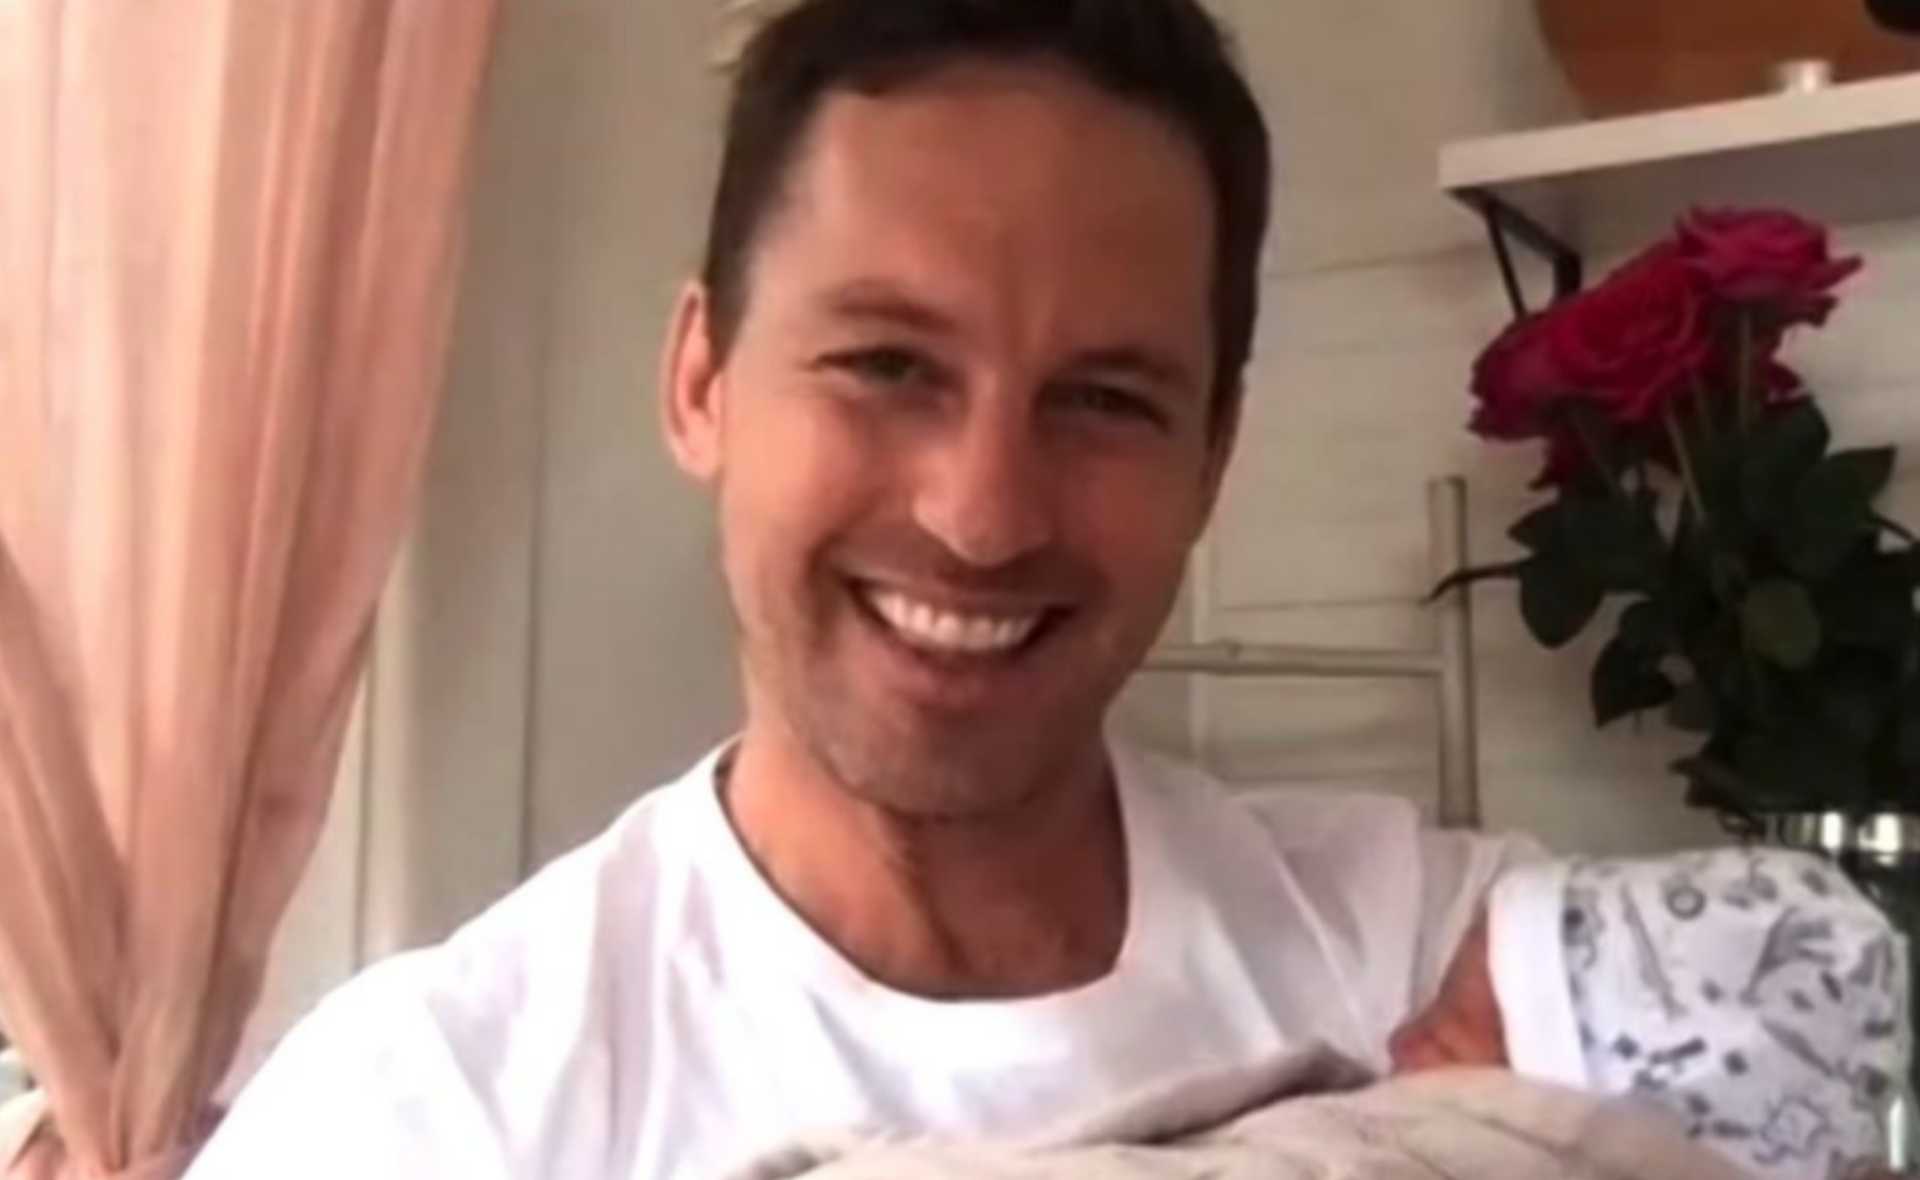 Studio 10 host Tristan MacManus has welcomed his third child with wife Tahyna Tozzi